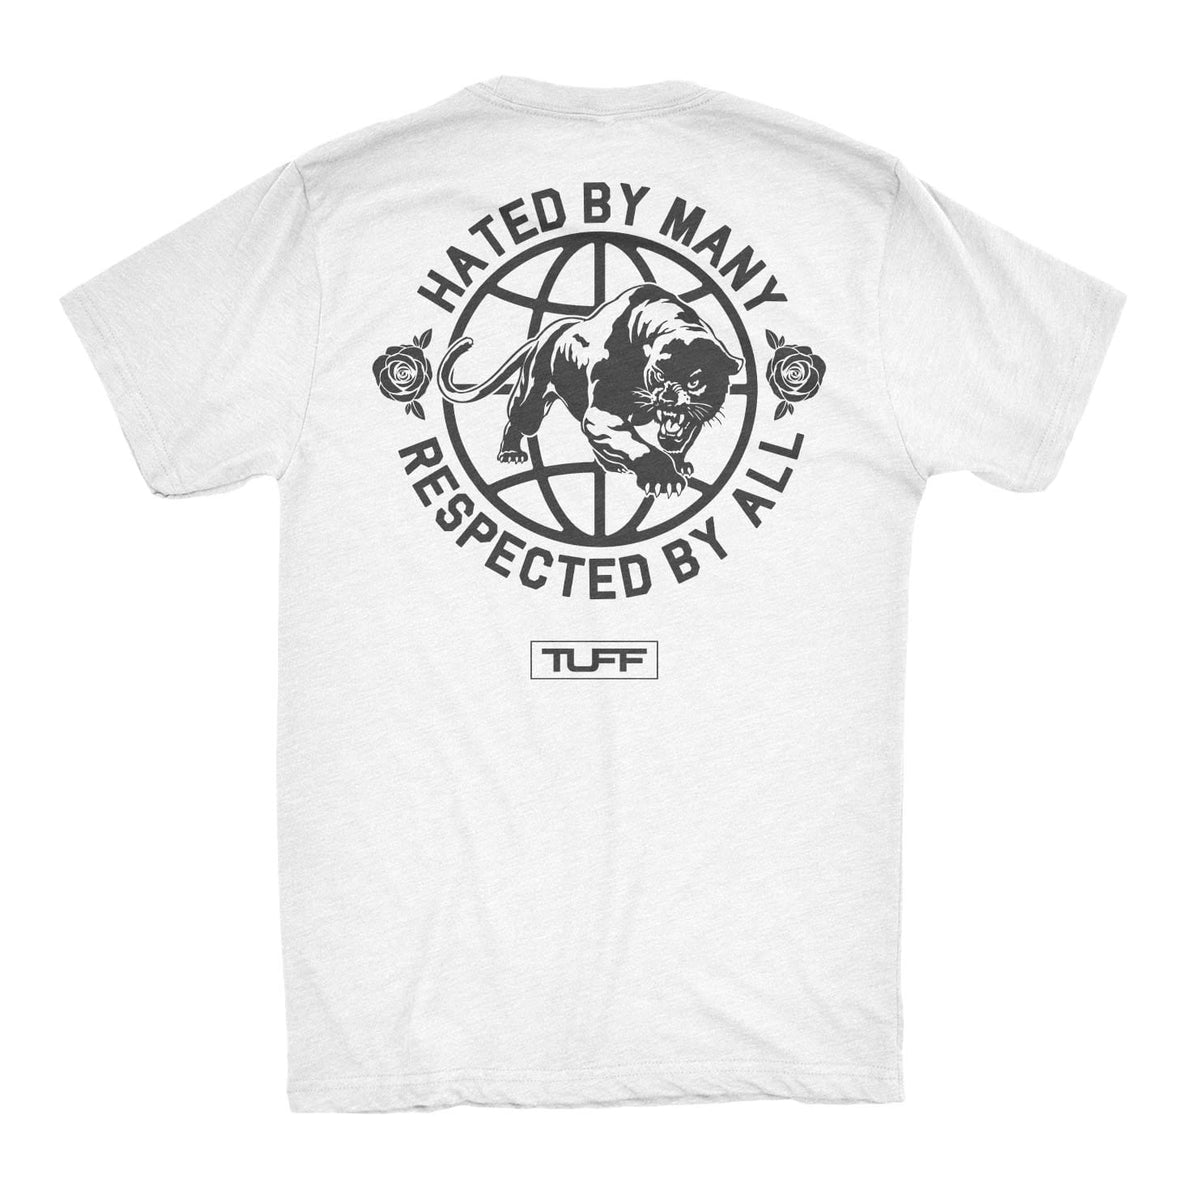 Hated By Many, Respected By All Tee S / White TuffWraps.com